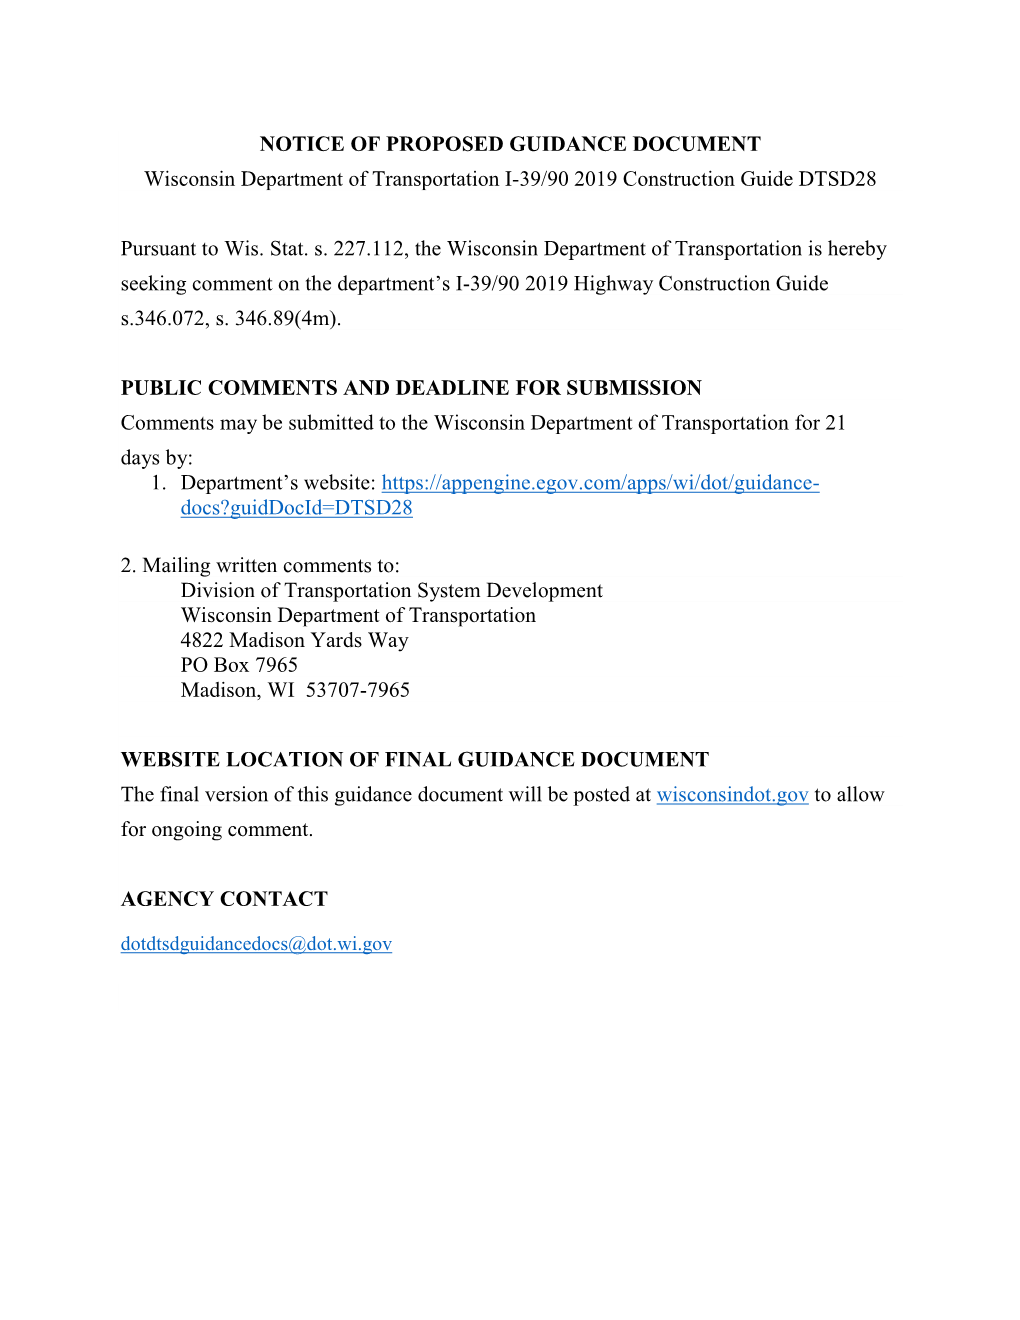 NOTICE of PROPOSED GUIDANCE DOCUMENT Wisconsin Department of Transportation I-39/90 2019 Construction Guide DTSD28